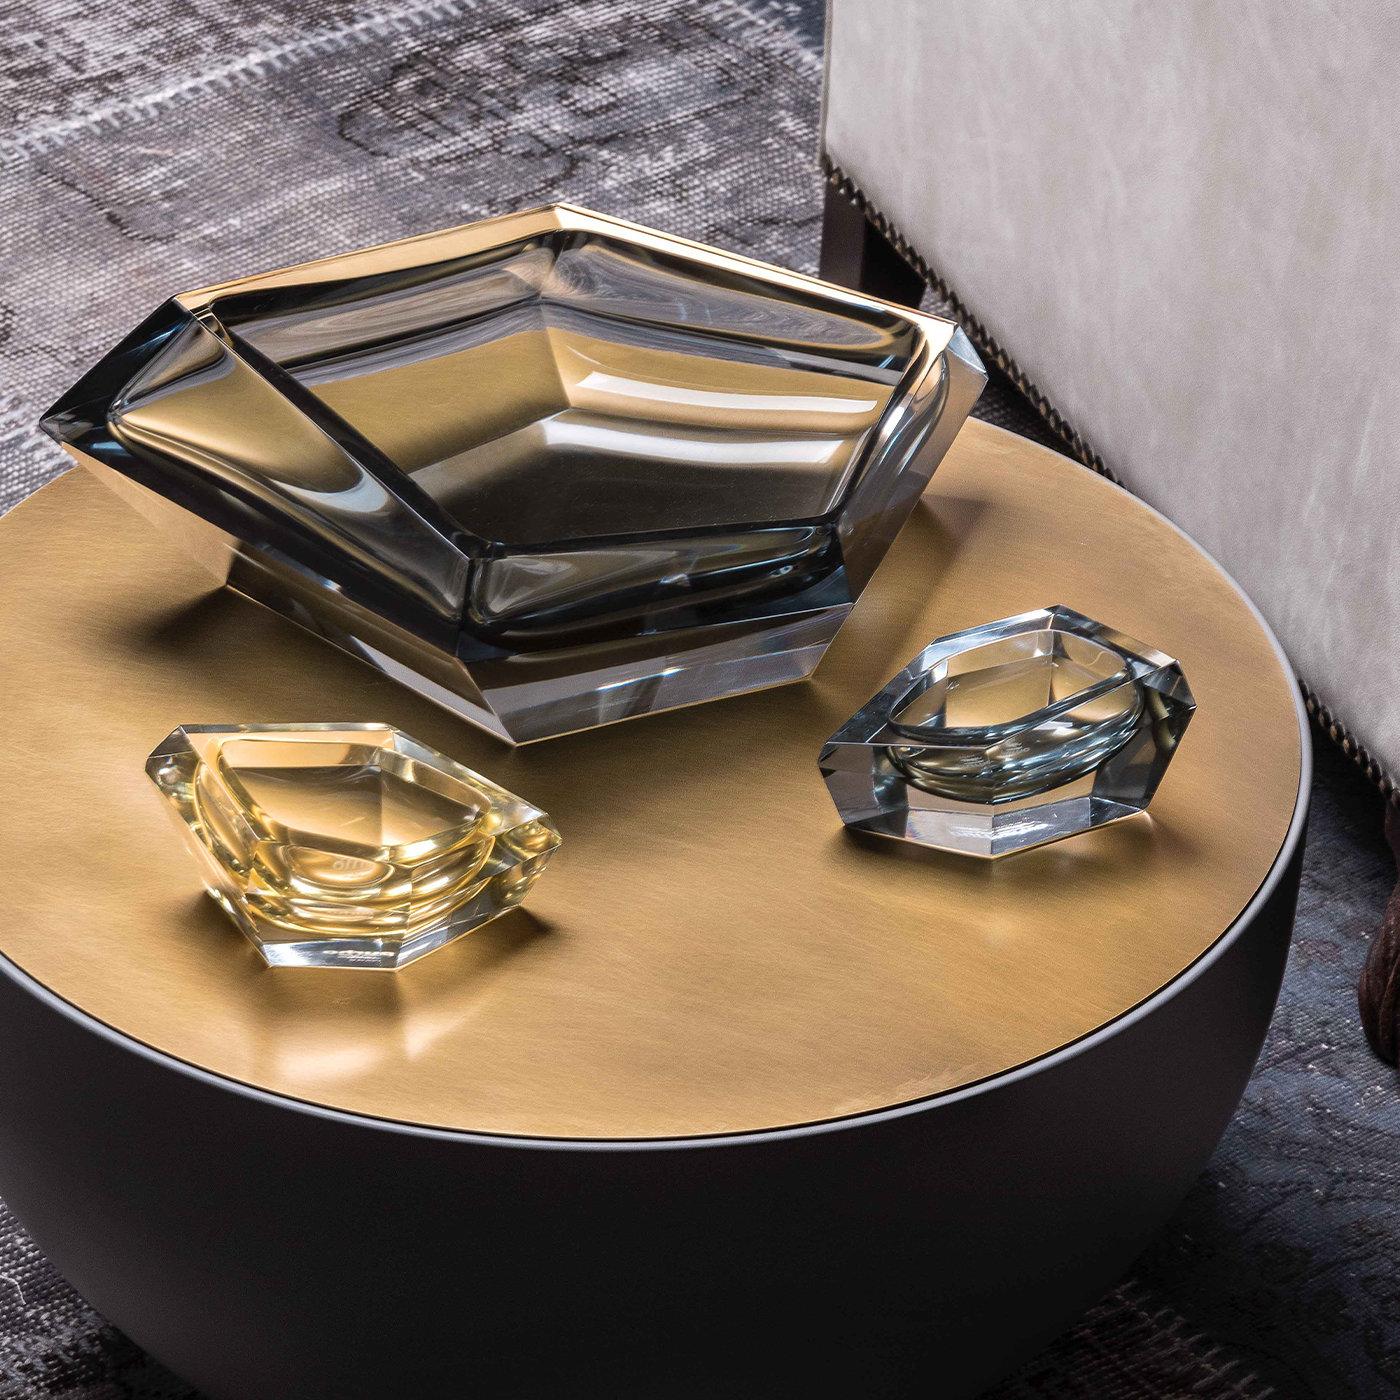 This elegant centerpiece is part of the Kastle collection designed by Karim Rashid in 2013. Distinctive for its multi-faceted, transparent surface that will reflect the surrounding light becoming a luminous object of functional decor, this tray can